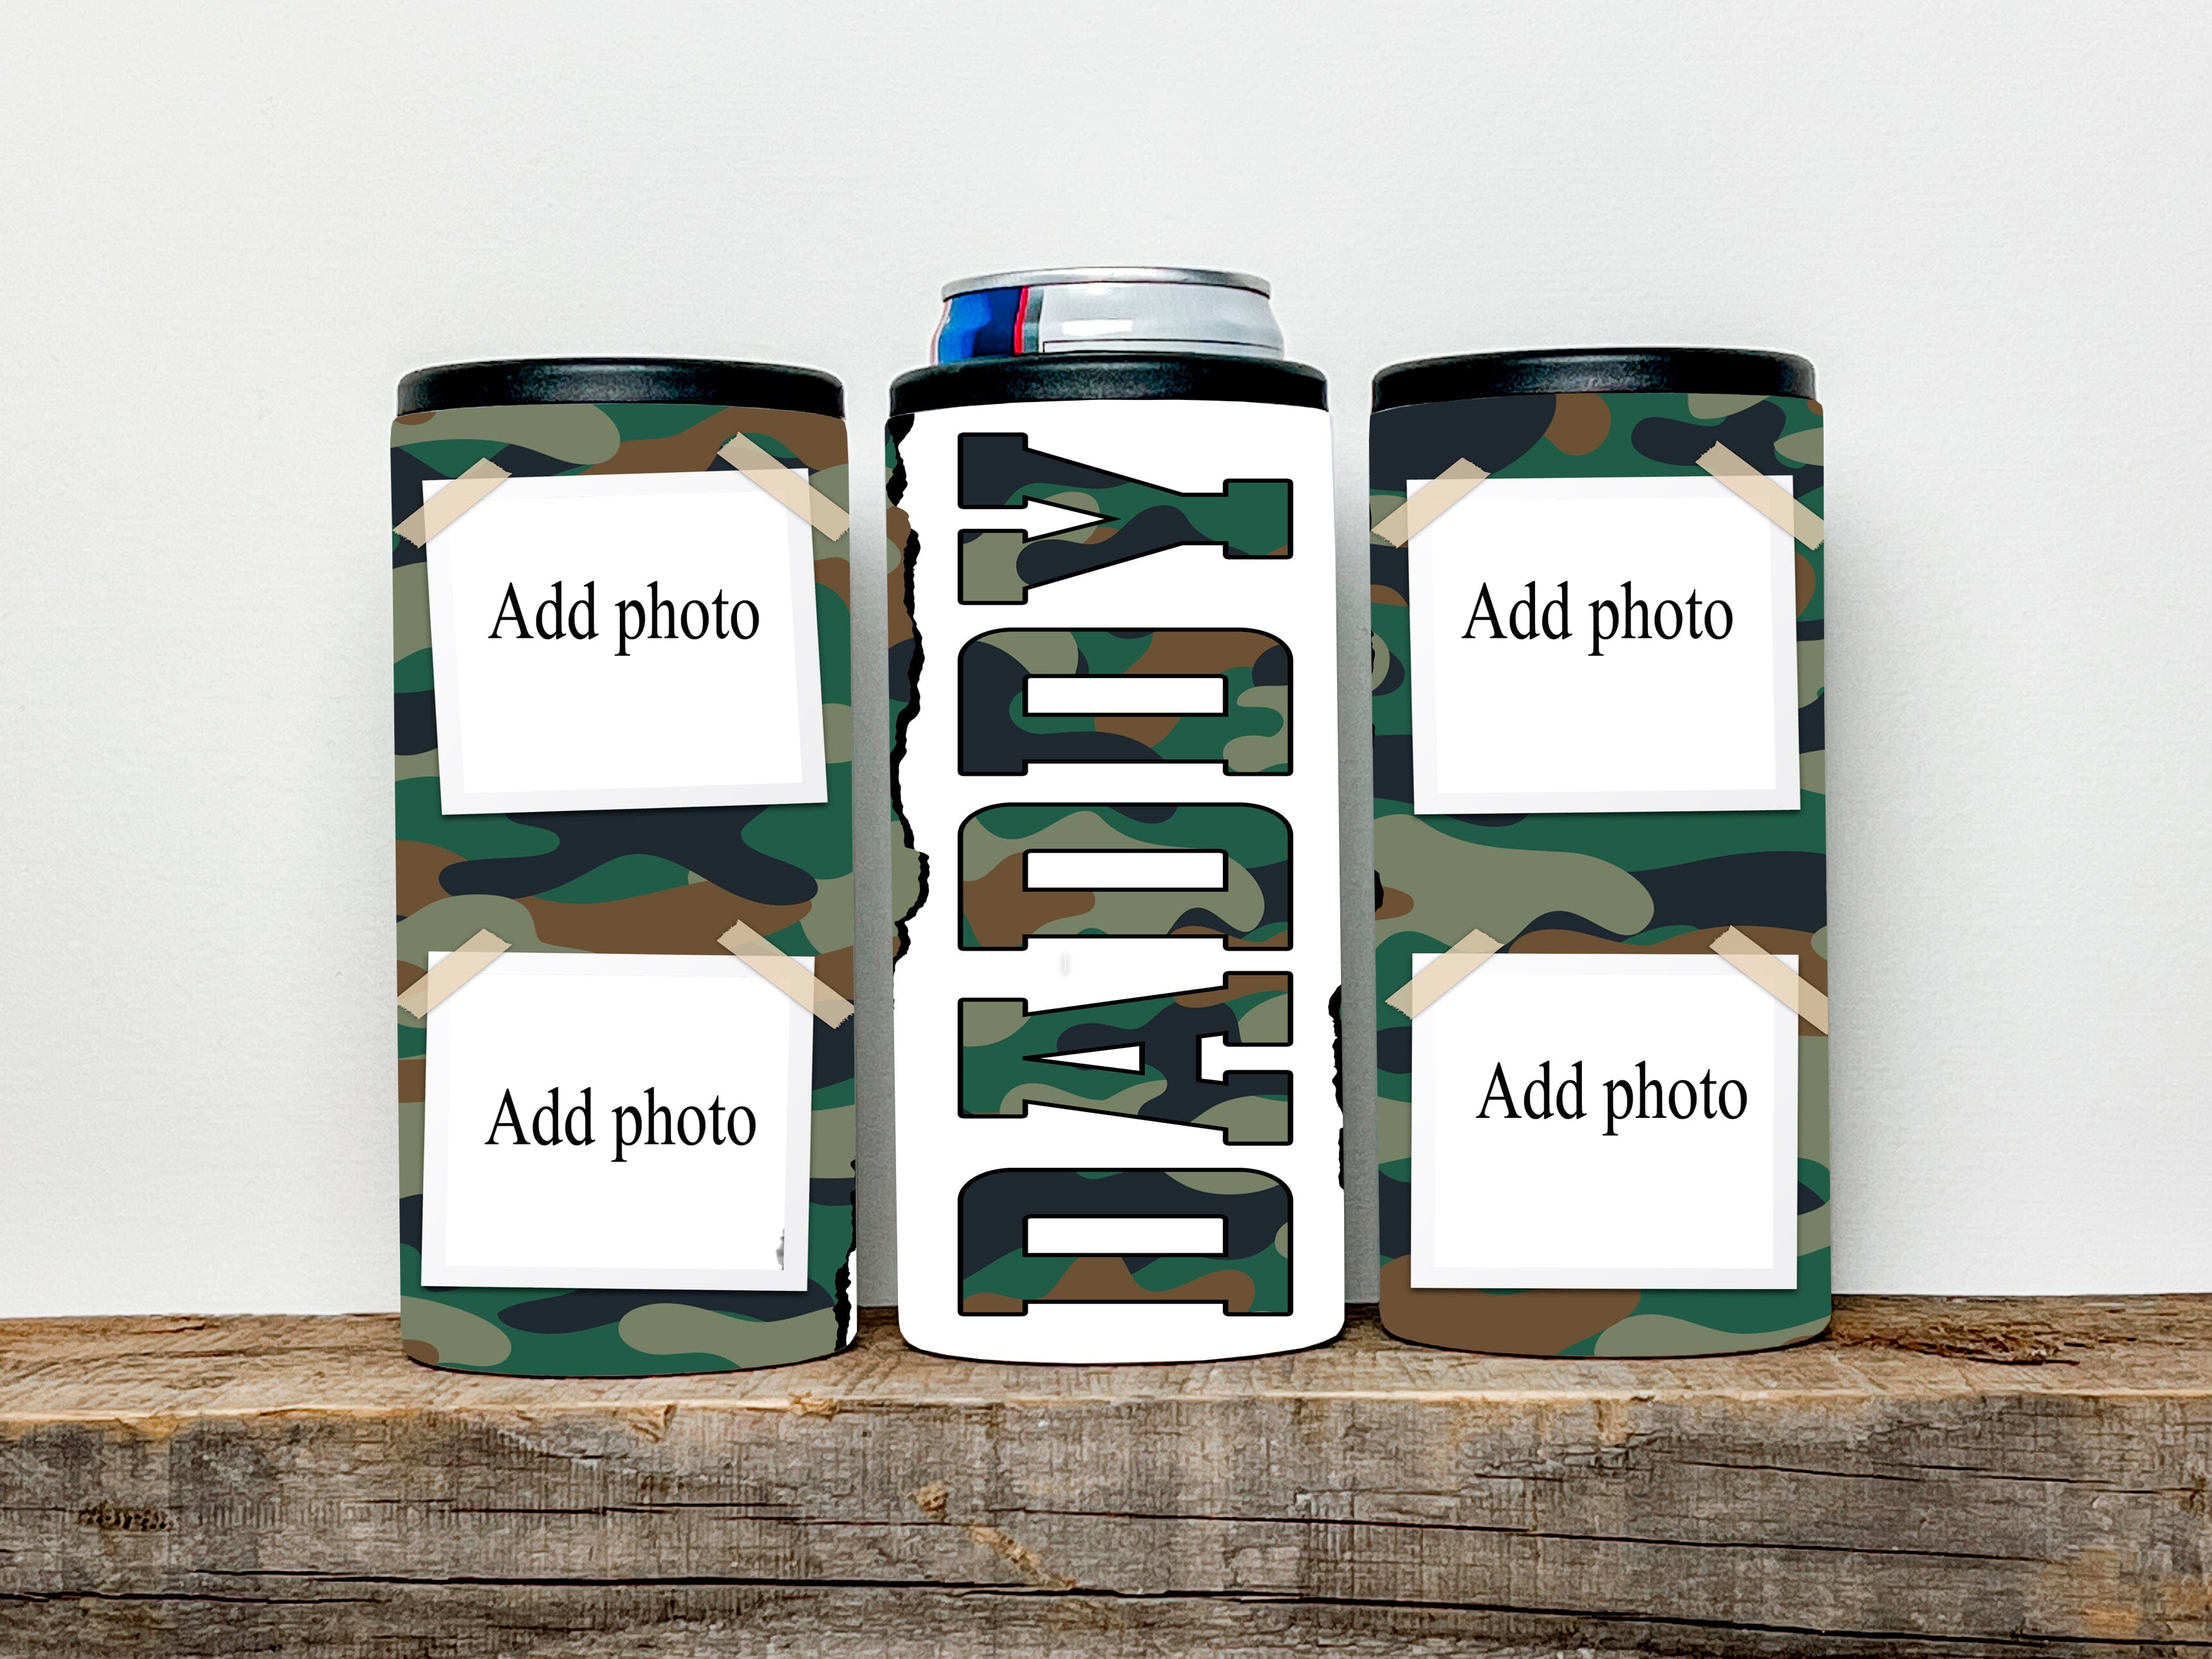 Custom photo frost buddy universal can cooler